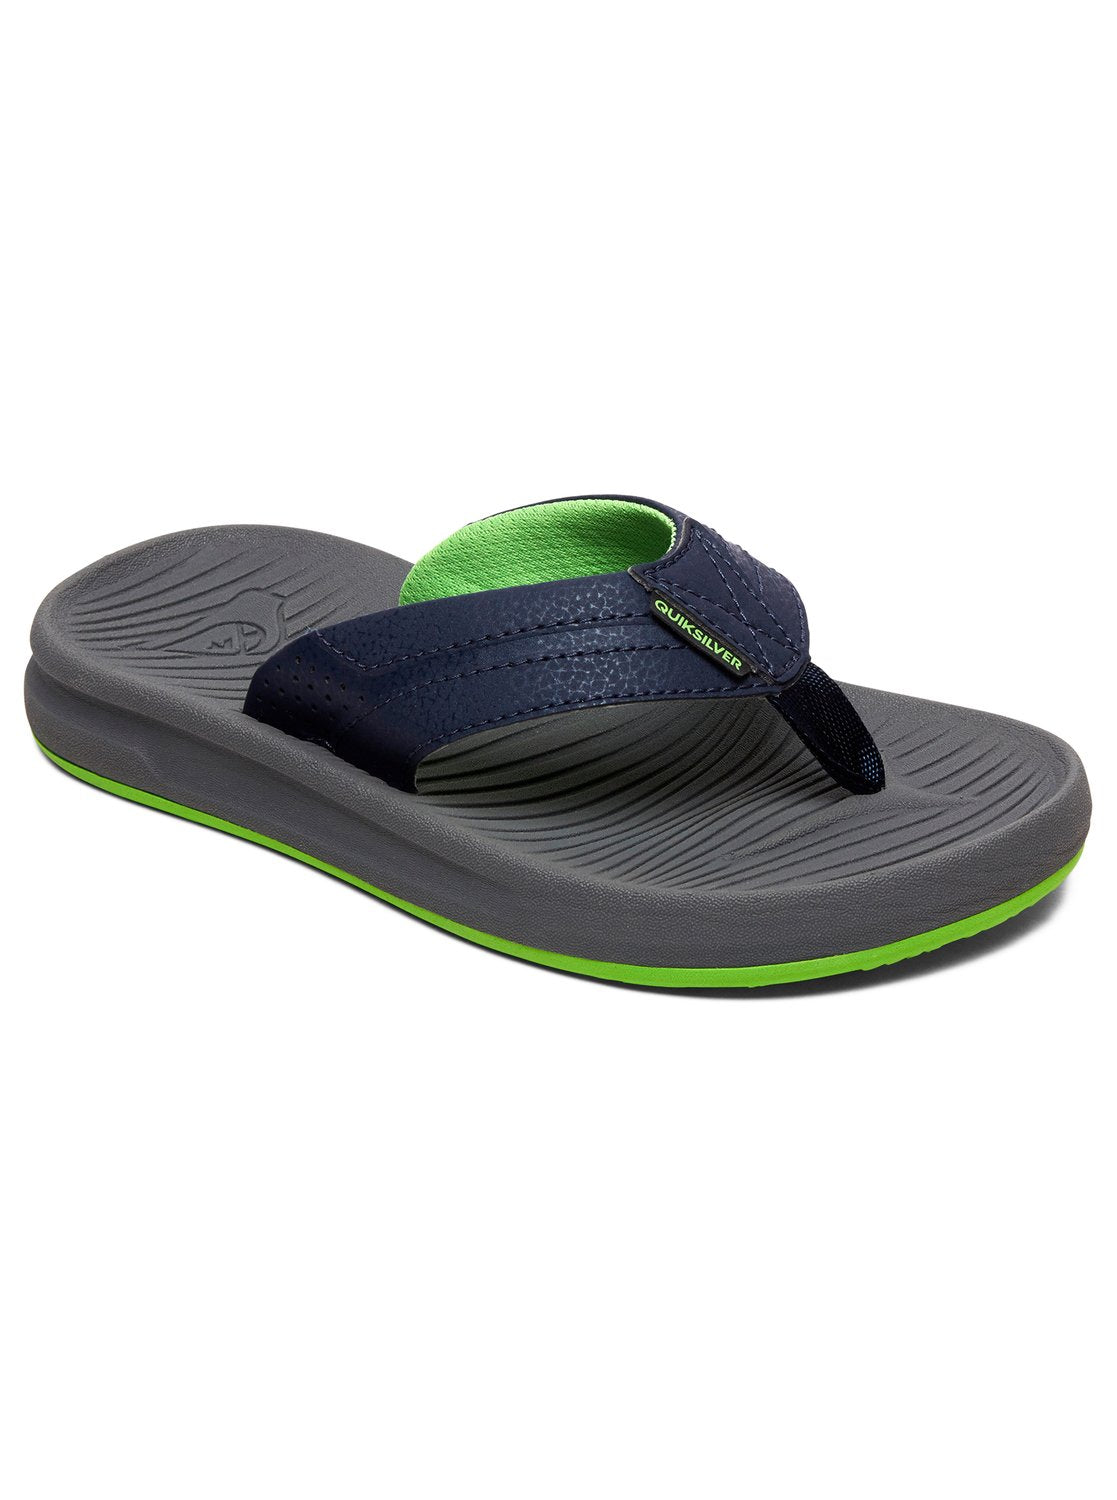 Quiksilver Oasis Youth Sandals XBSB-Blue-Grey-Blue 4 Y